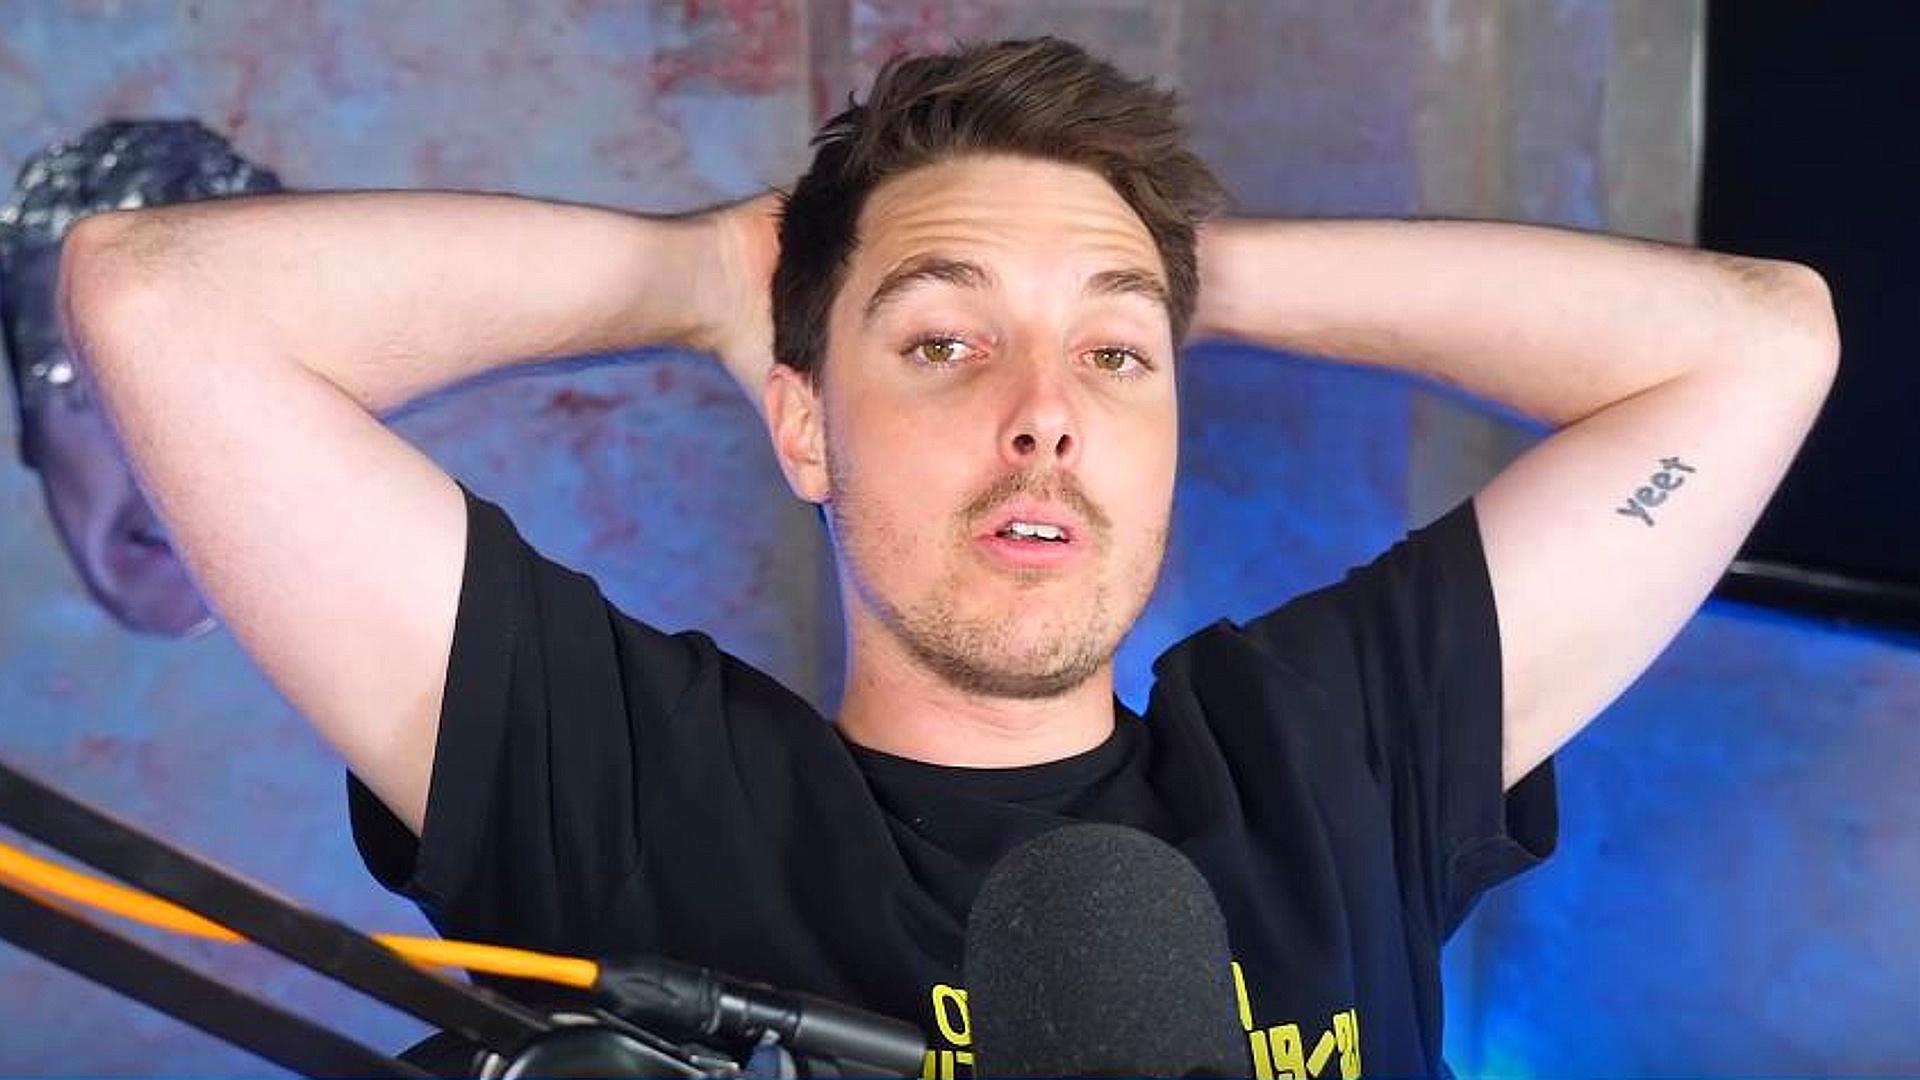 LazarBeam took a swipe at Epic's choice to overhaul the old Fortnite UI.